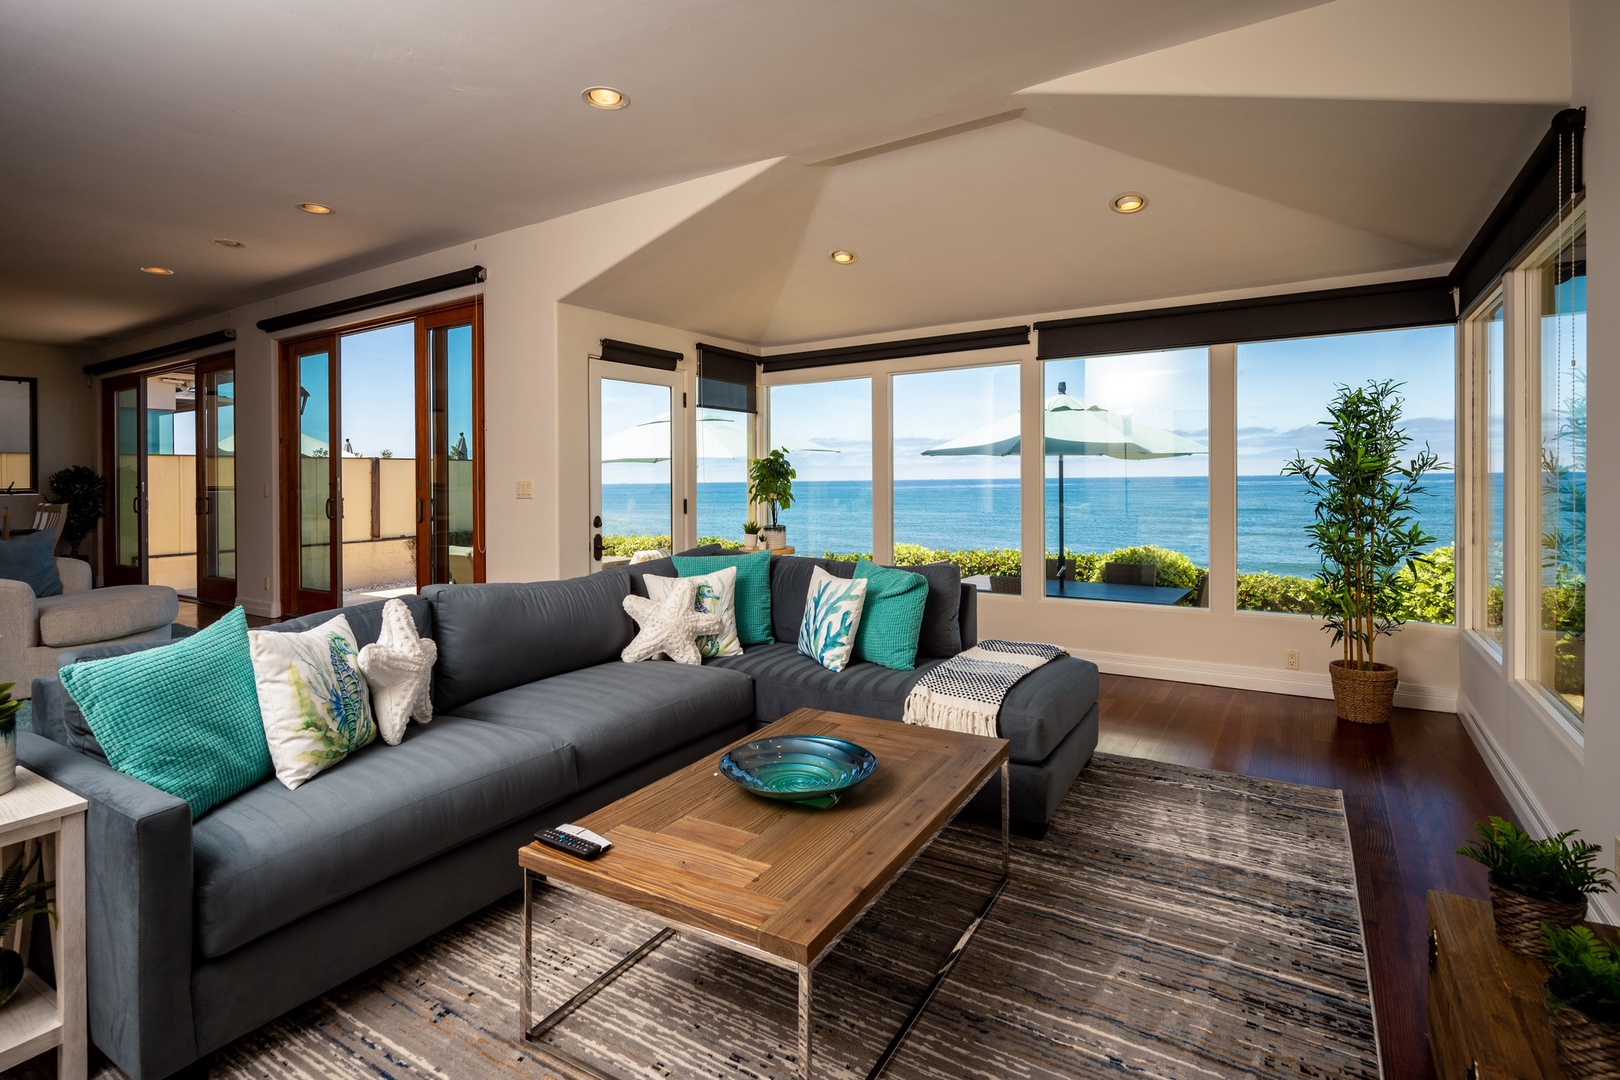 Living area with ocean views